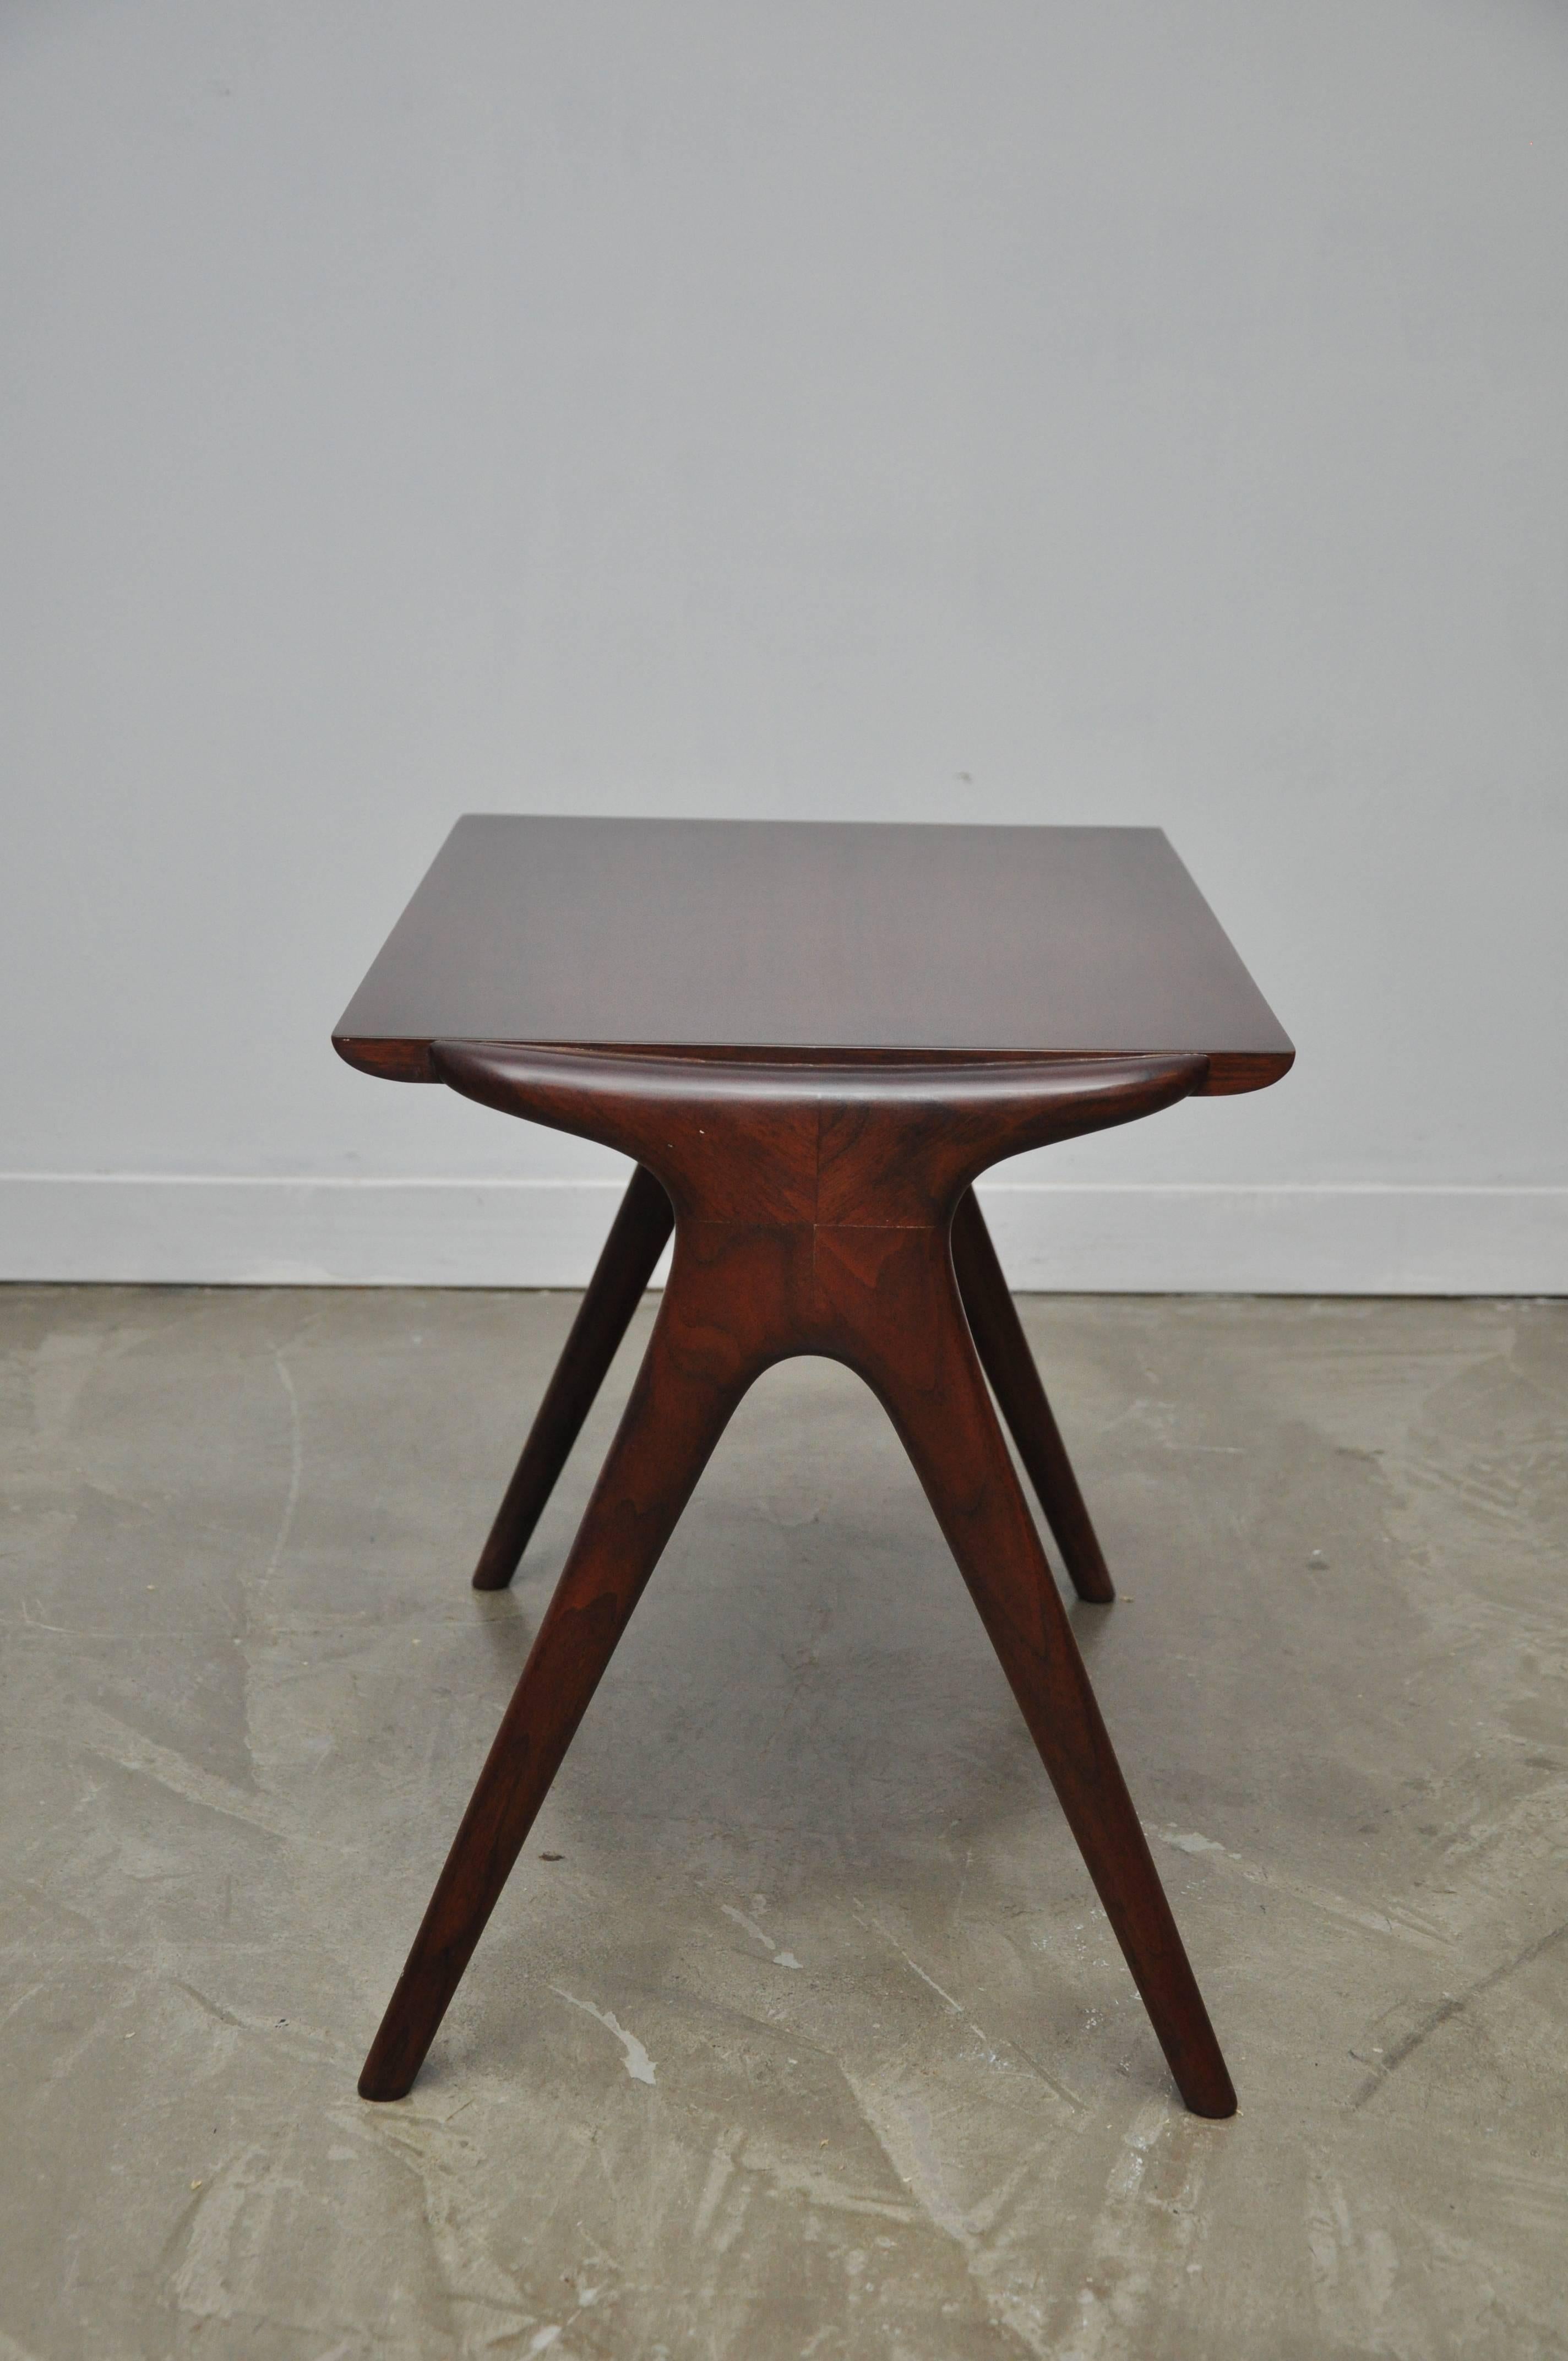 We are proud to present this walnut side table. Beautiful sculptural form. Designed by Vladimir Kagan for Kagan-Dreyfuus, signed 